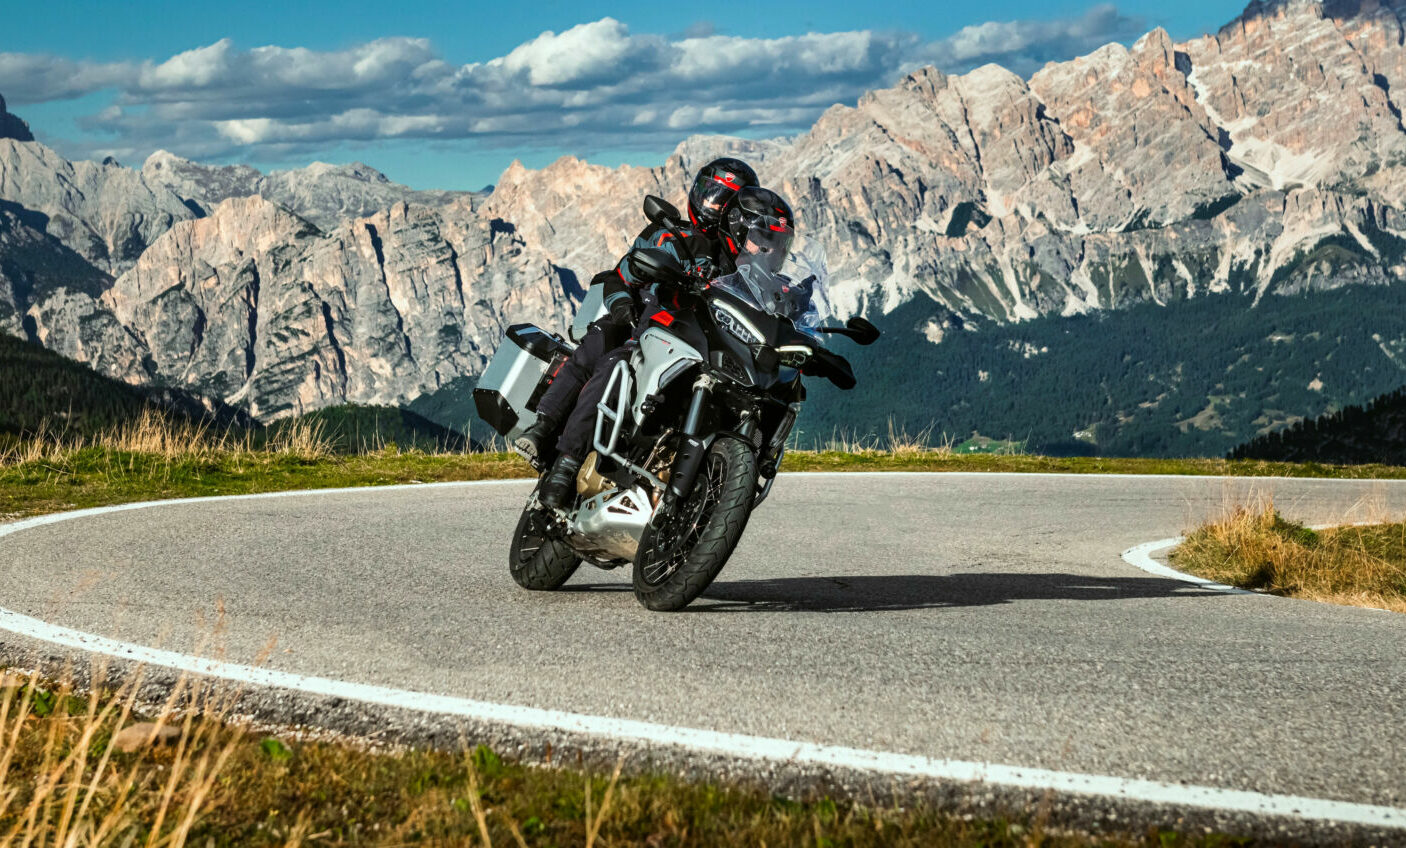 The Ducati Multistrada V4 family is the most popular model family for Ducati. This is a 2023-model Multistrada V4 Rally. Photo courtesy Ducati.